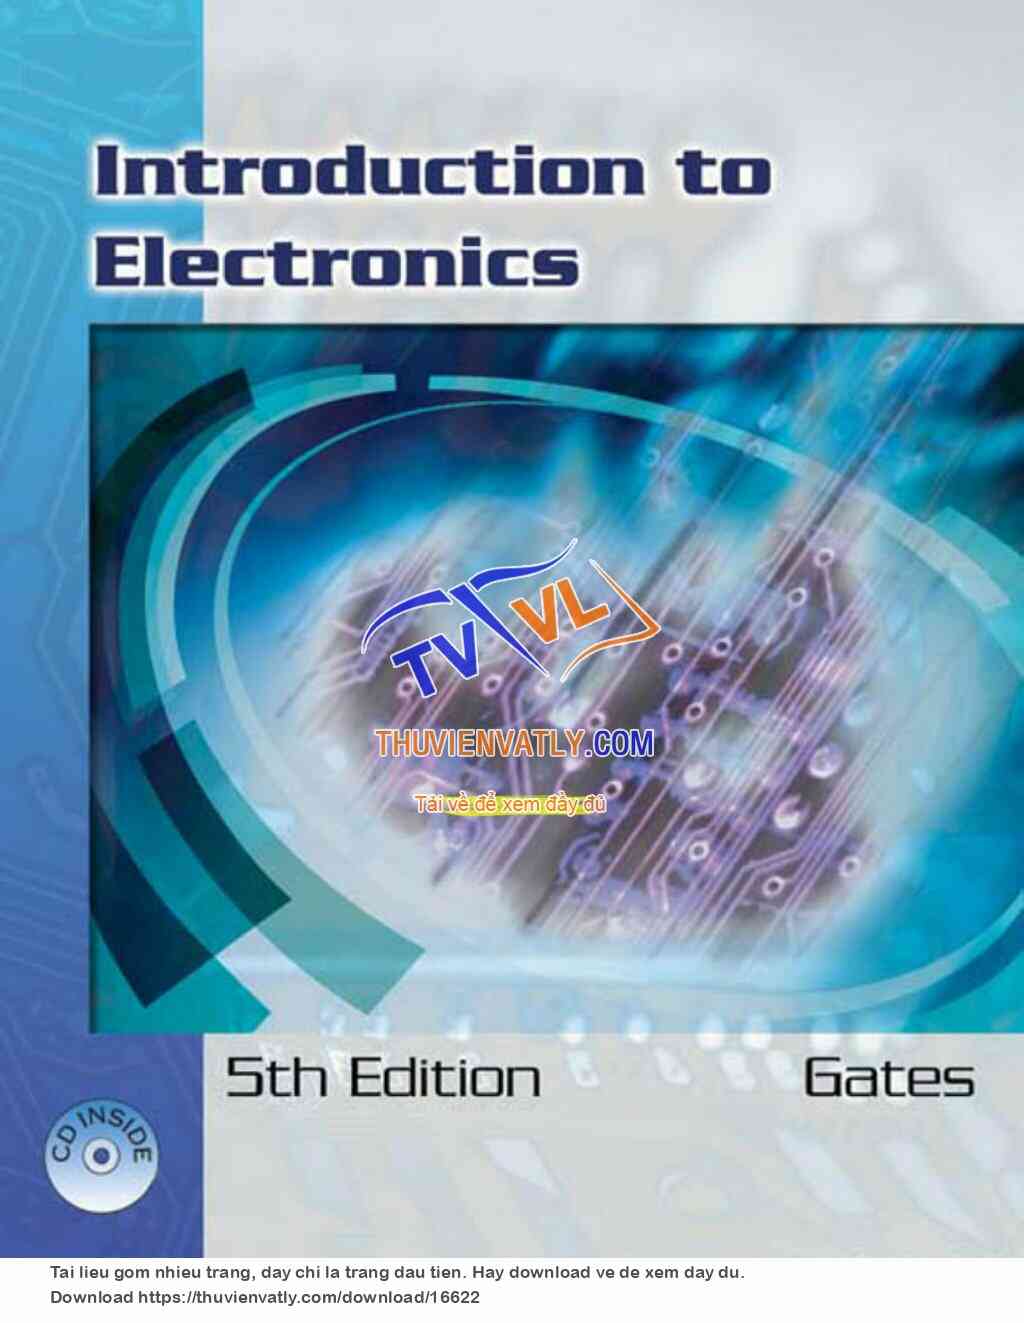 Introduction to Electronics, 5th edition (Earl D. Gates, Cengage Learning 2007)